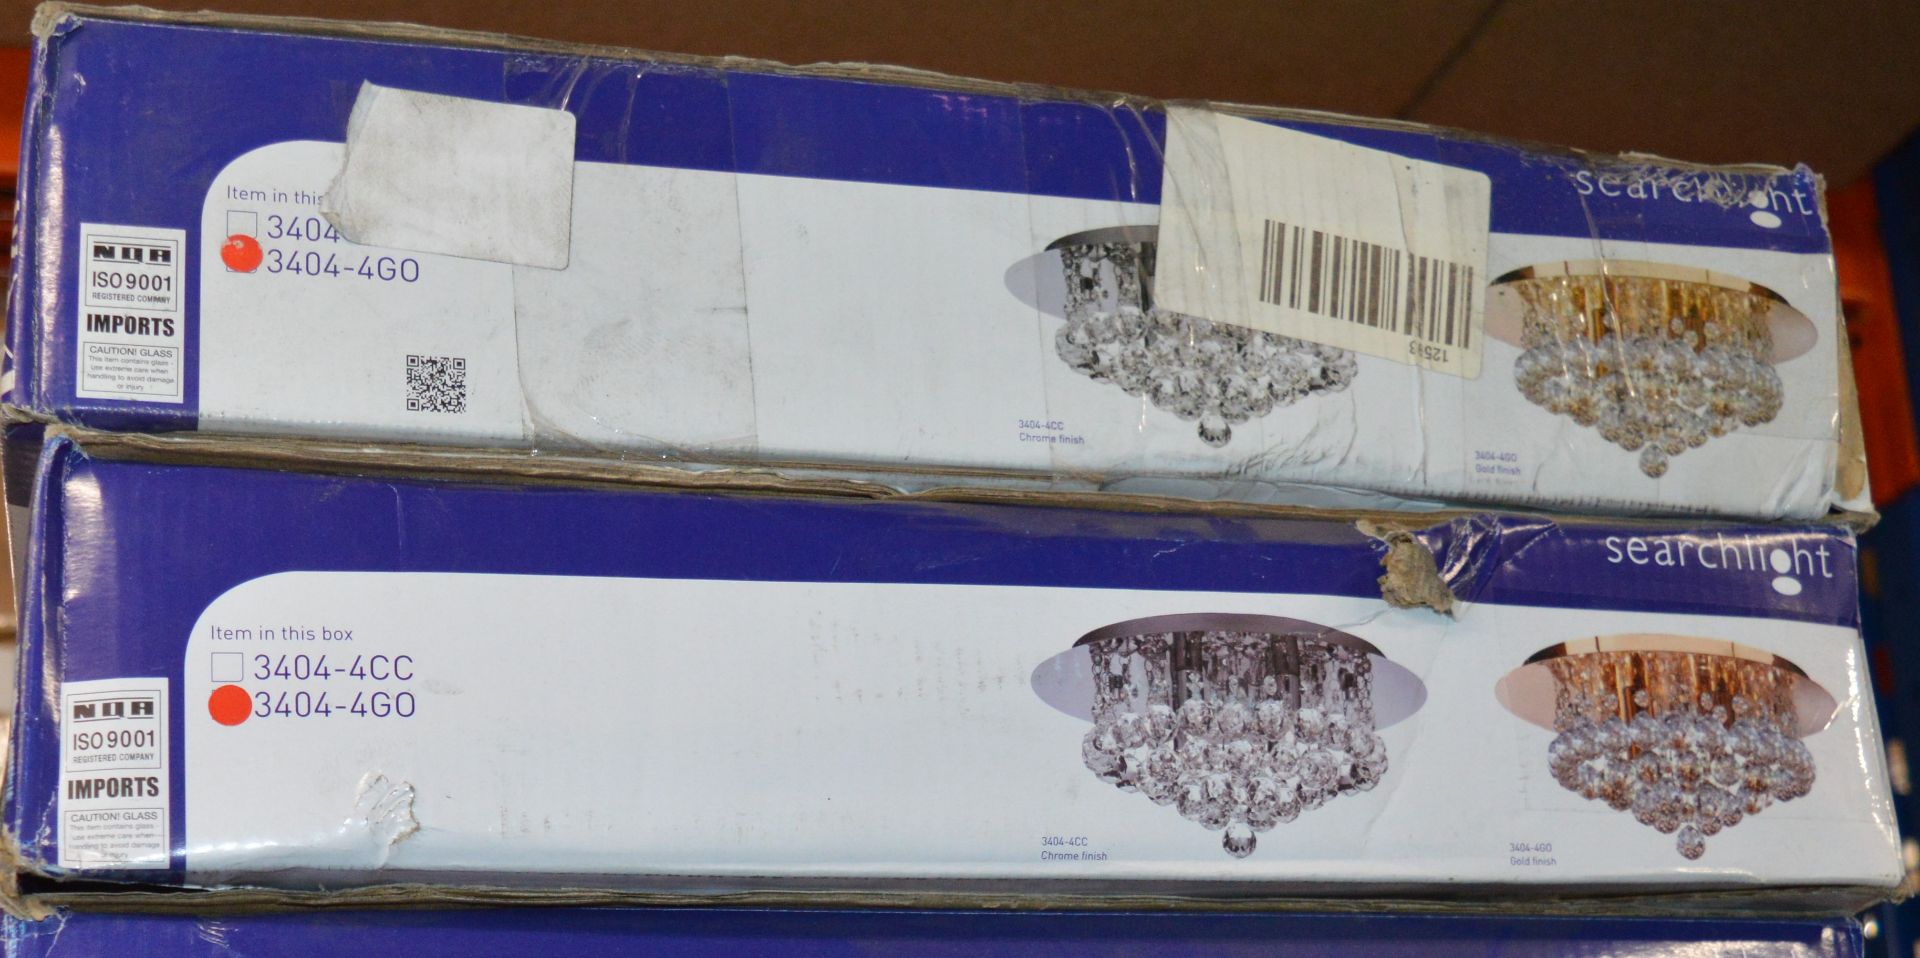 2 x Searchlight 3404-4GO Hanna 4 Light Semi Flush Ceiling Light With Gold Finish - Brand New and